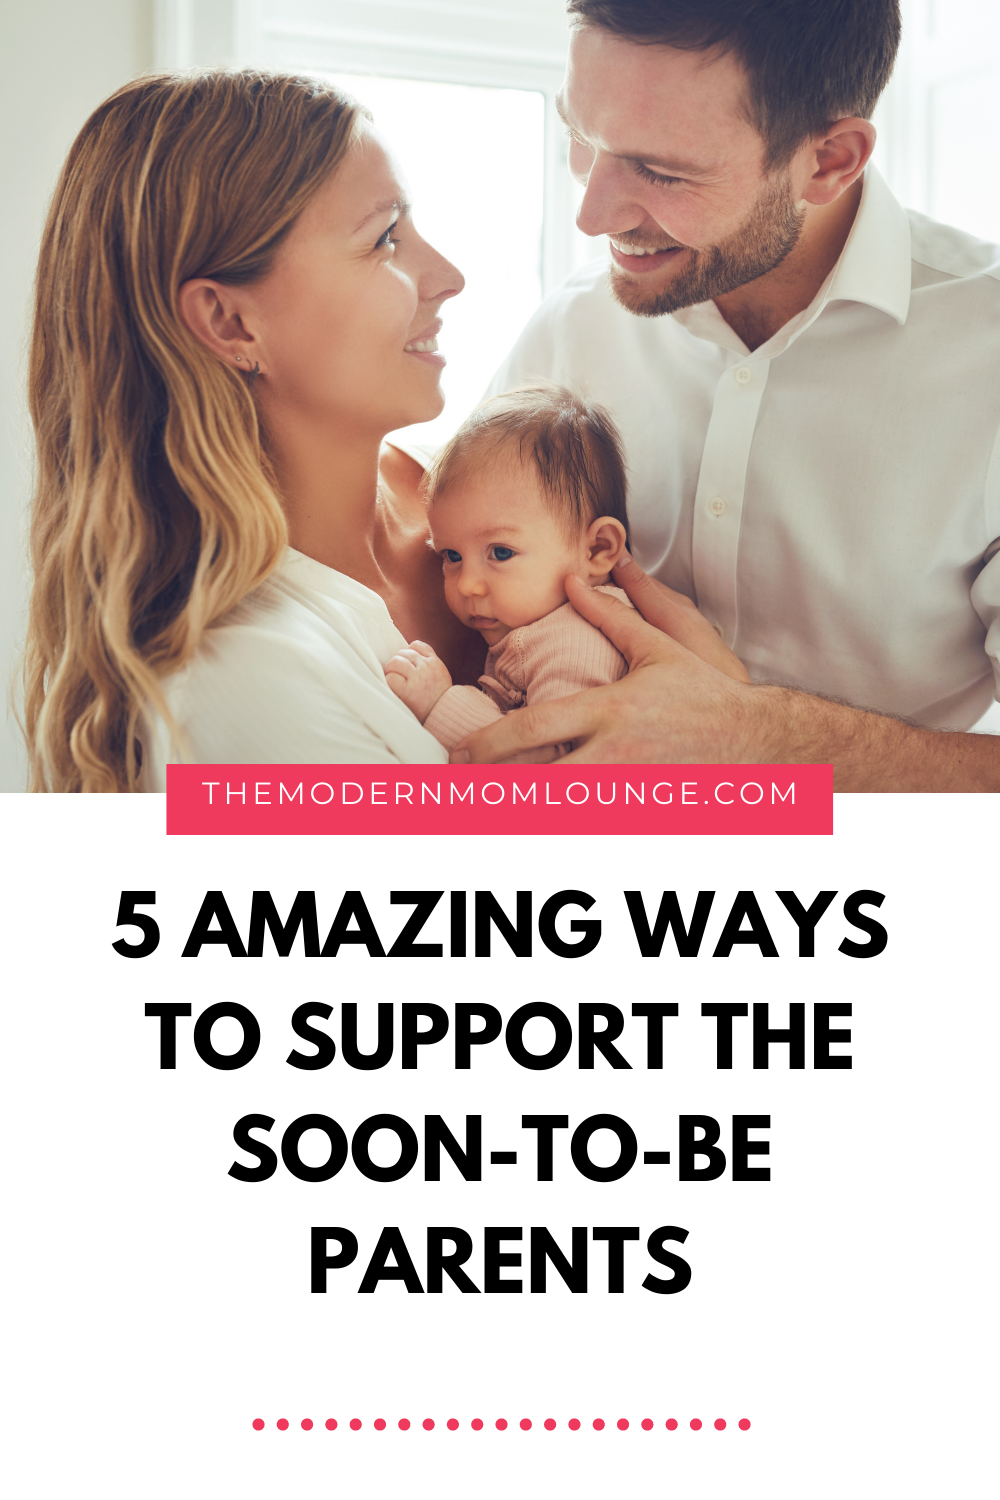 5 Amazing Ways to Support the Soon-To-Be Parents